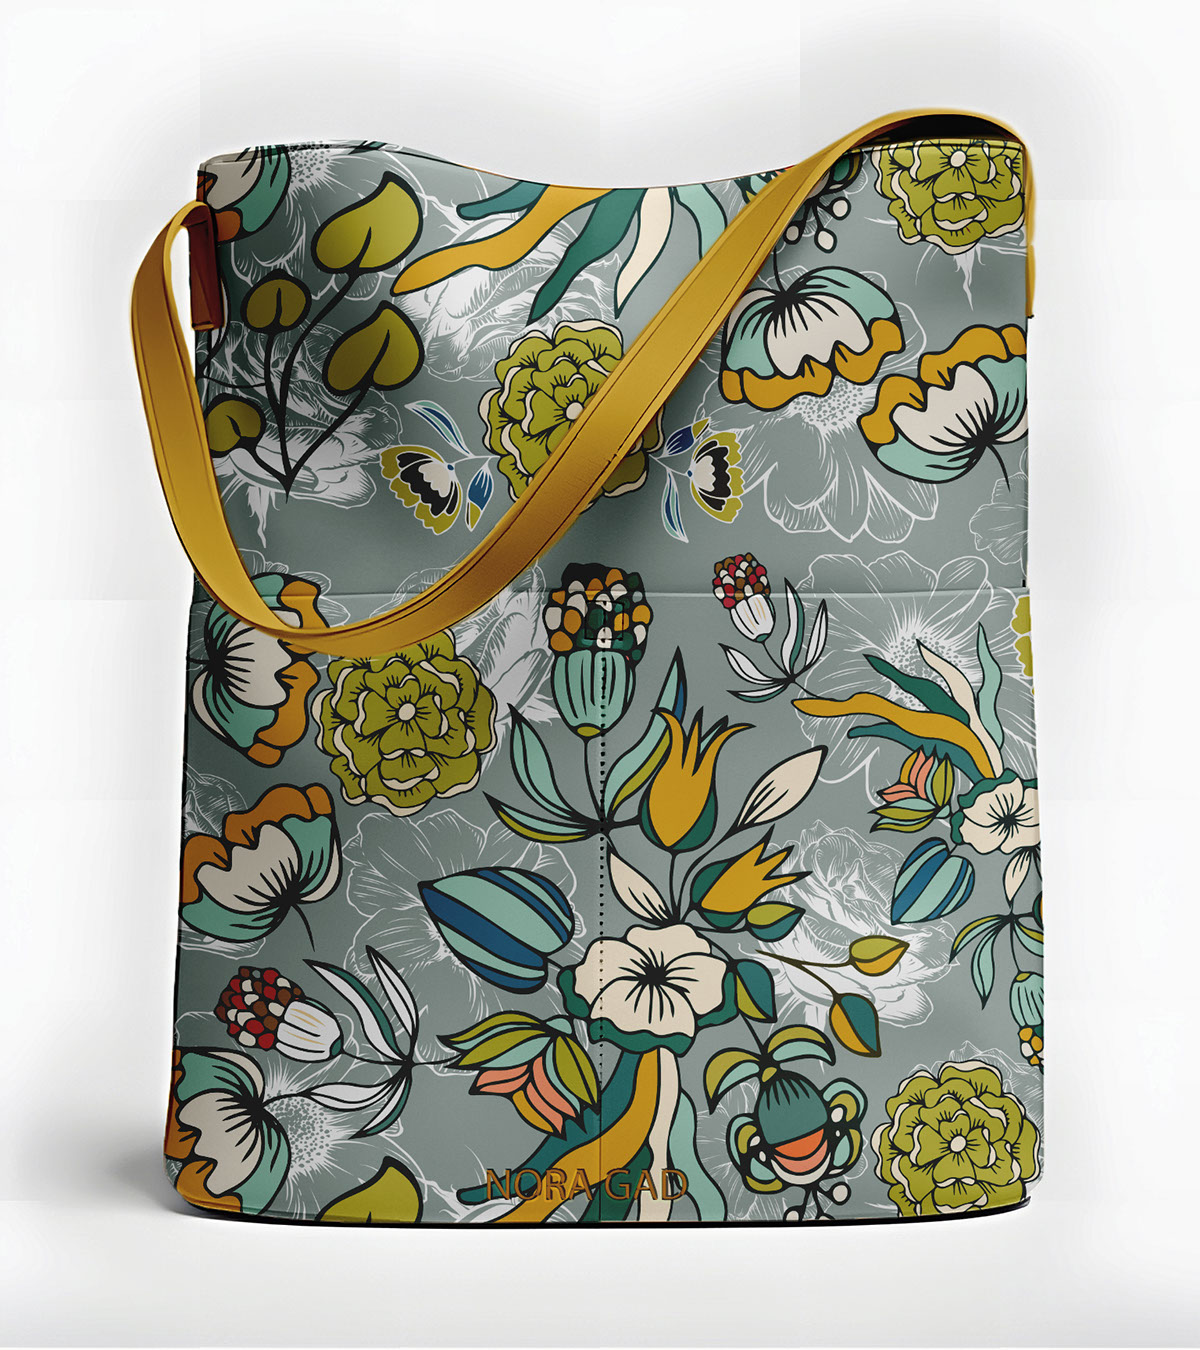 Botanical Serenade Seamless Pattern 12x12 inches rendition image